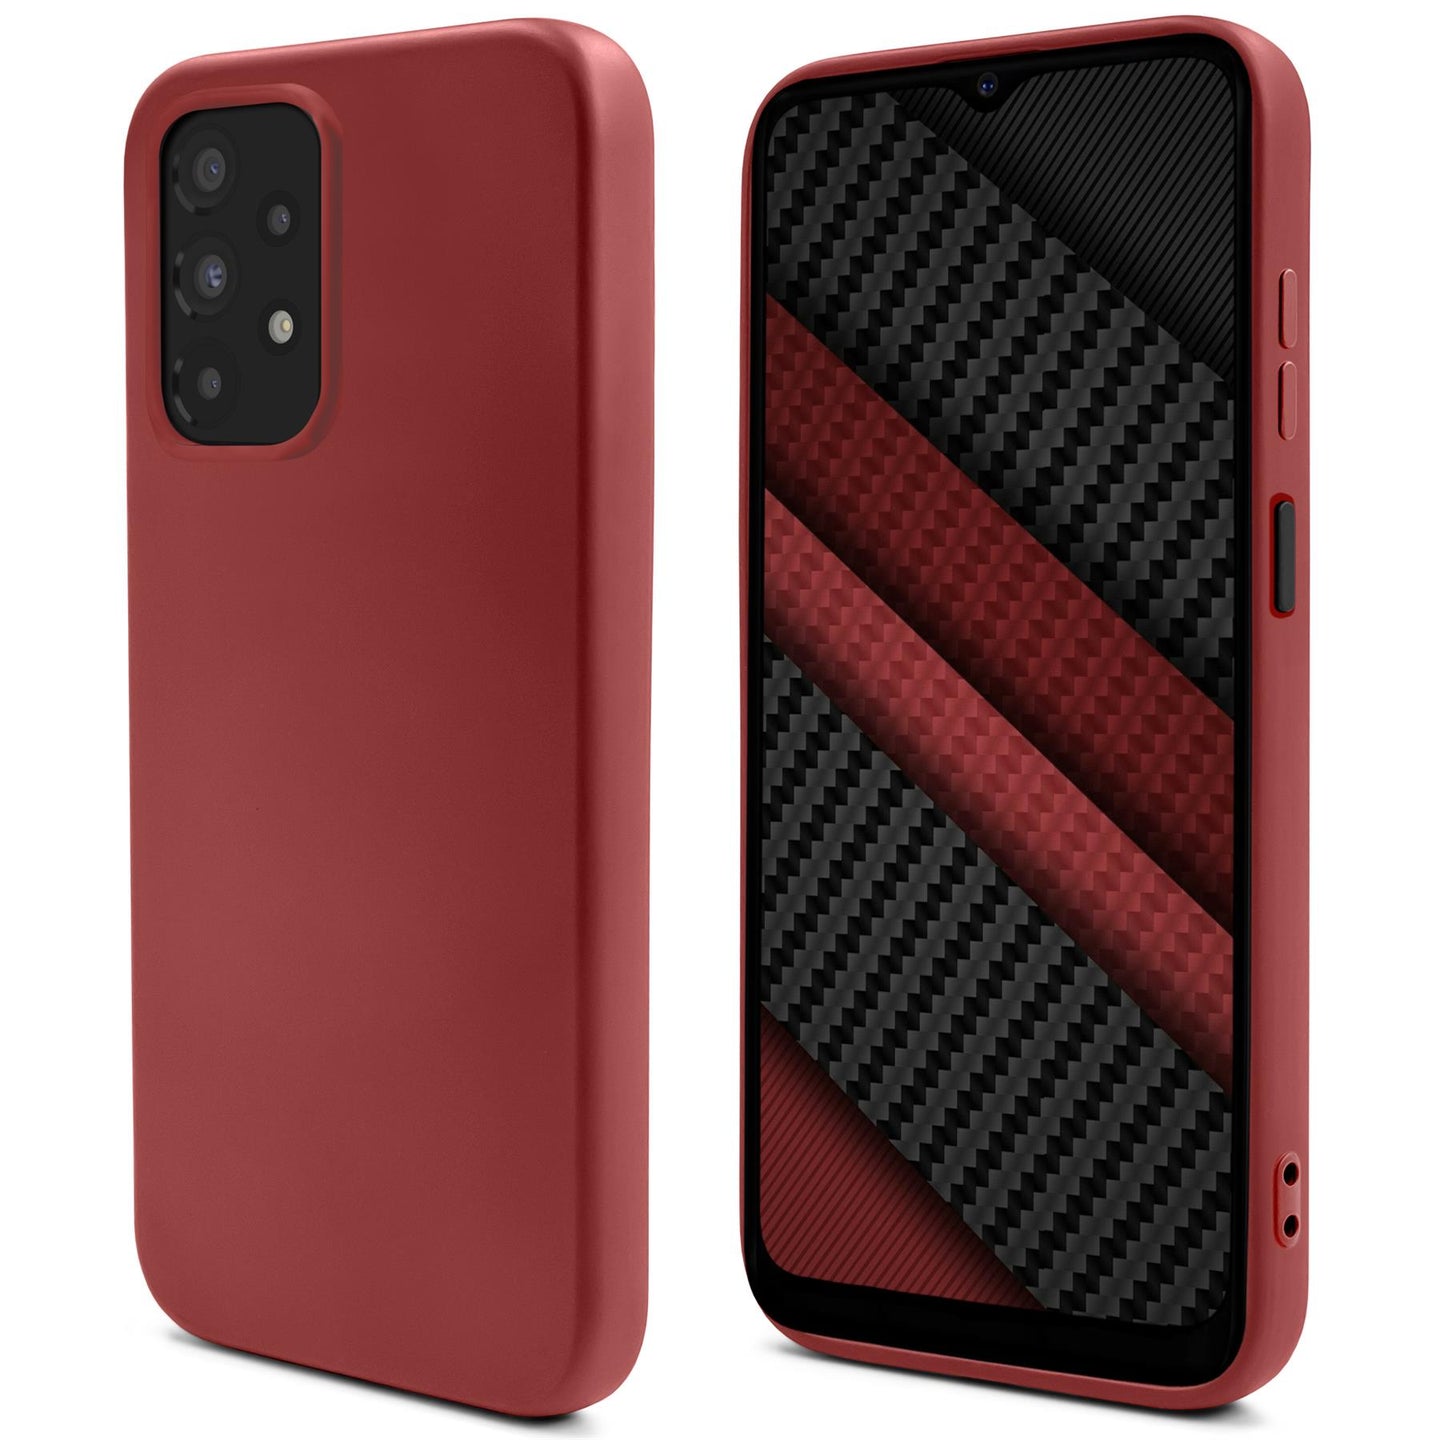 Moozy Lifestyle. Silicone Case for Samsung A13 4G, Vintage Pink - Liquid Silicone Lightweight Cover with Matte Finish and Soft Microfiber Lining, Premium Silicone Case